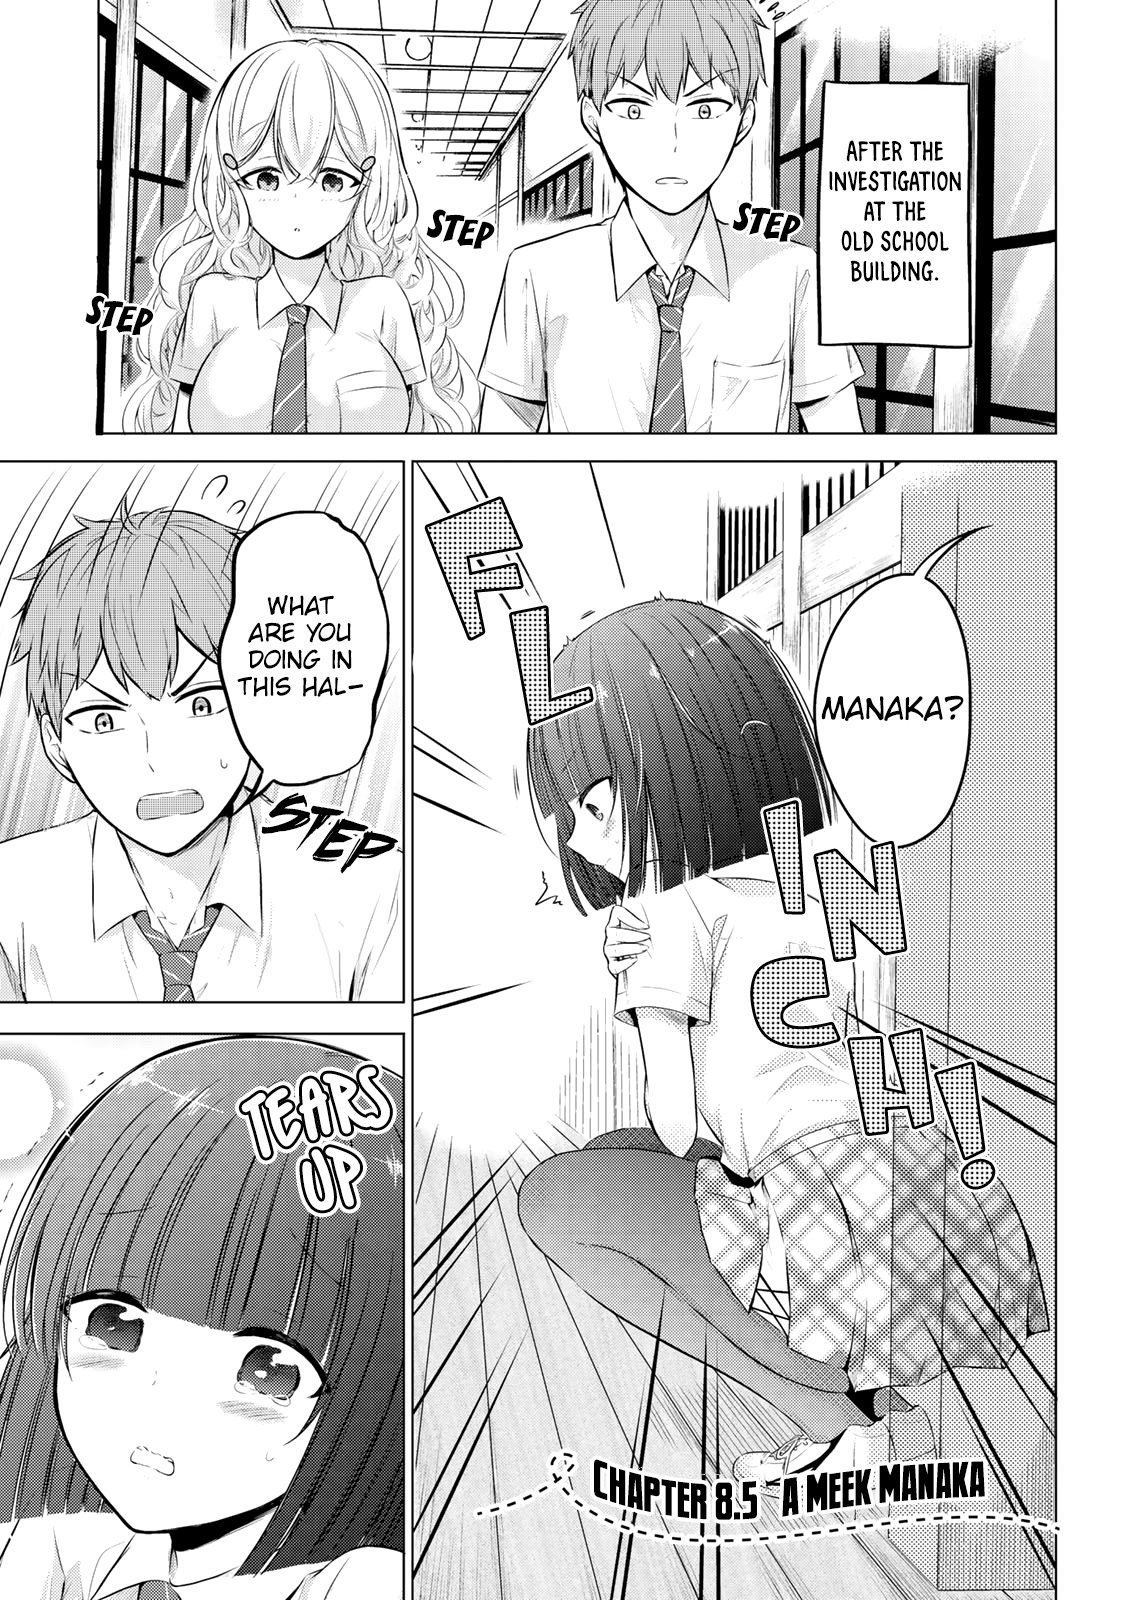 The Student Council President Solves Everything On The Bed Chapter 8.5: A Meek Manaka - Picture 2